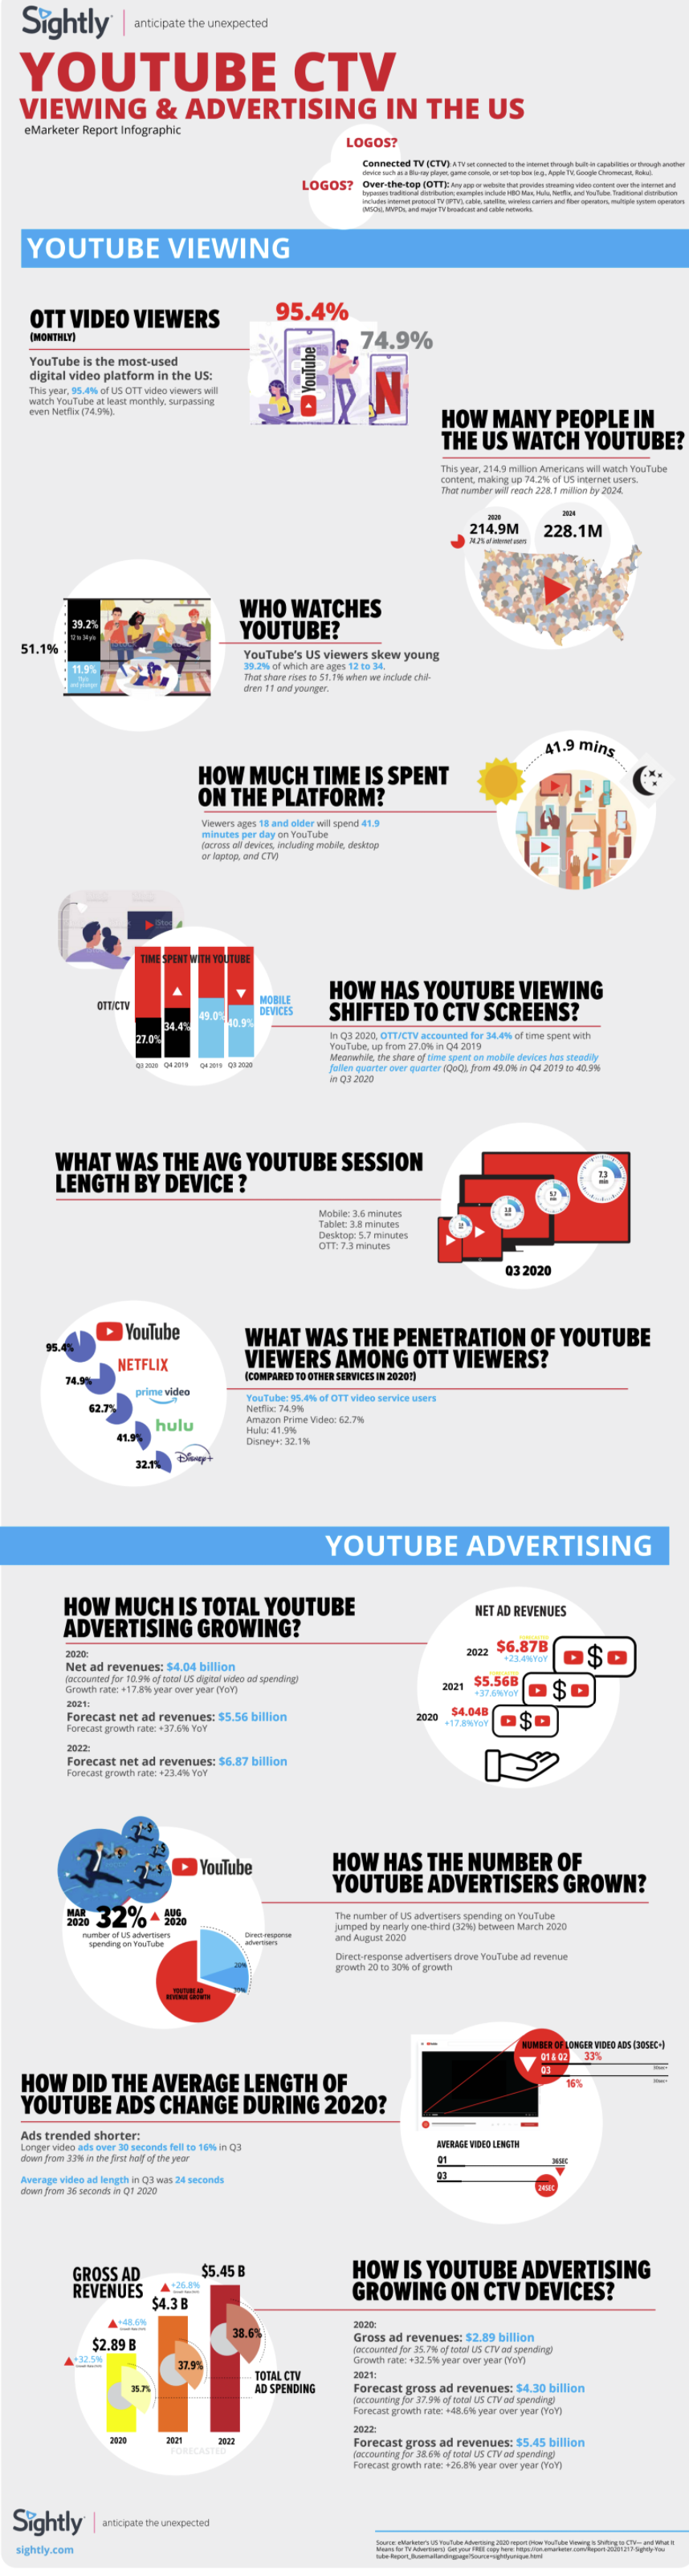 youtube connected tv viewing and advertising in the us infographic